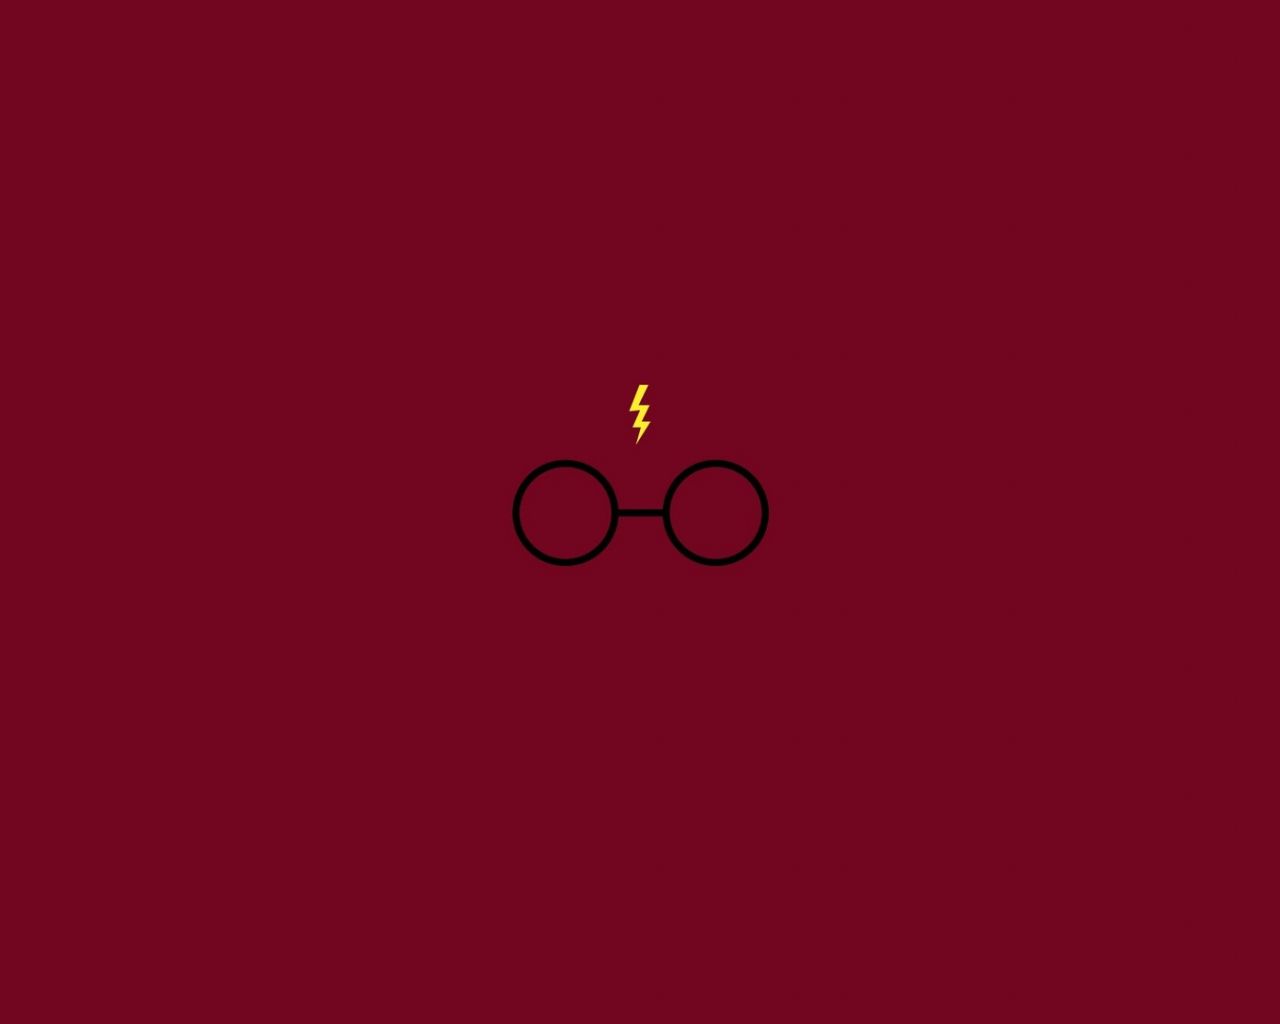 Free download Minimalistic Harry Potter Wallpaper For iPhone 4 [1920x1080] for your Desktop, Mobile & Tablet. Explore Harry Potter Twitter Background. Harry Potter Twitter Background, Harry Potter Twitter Background, Harry Potter Wallpaper